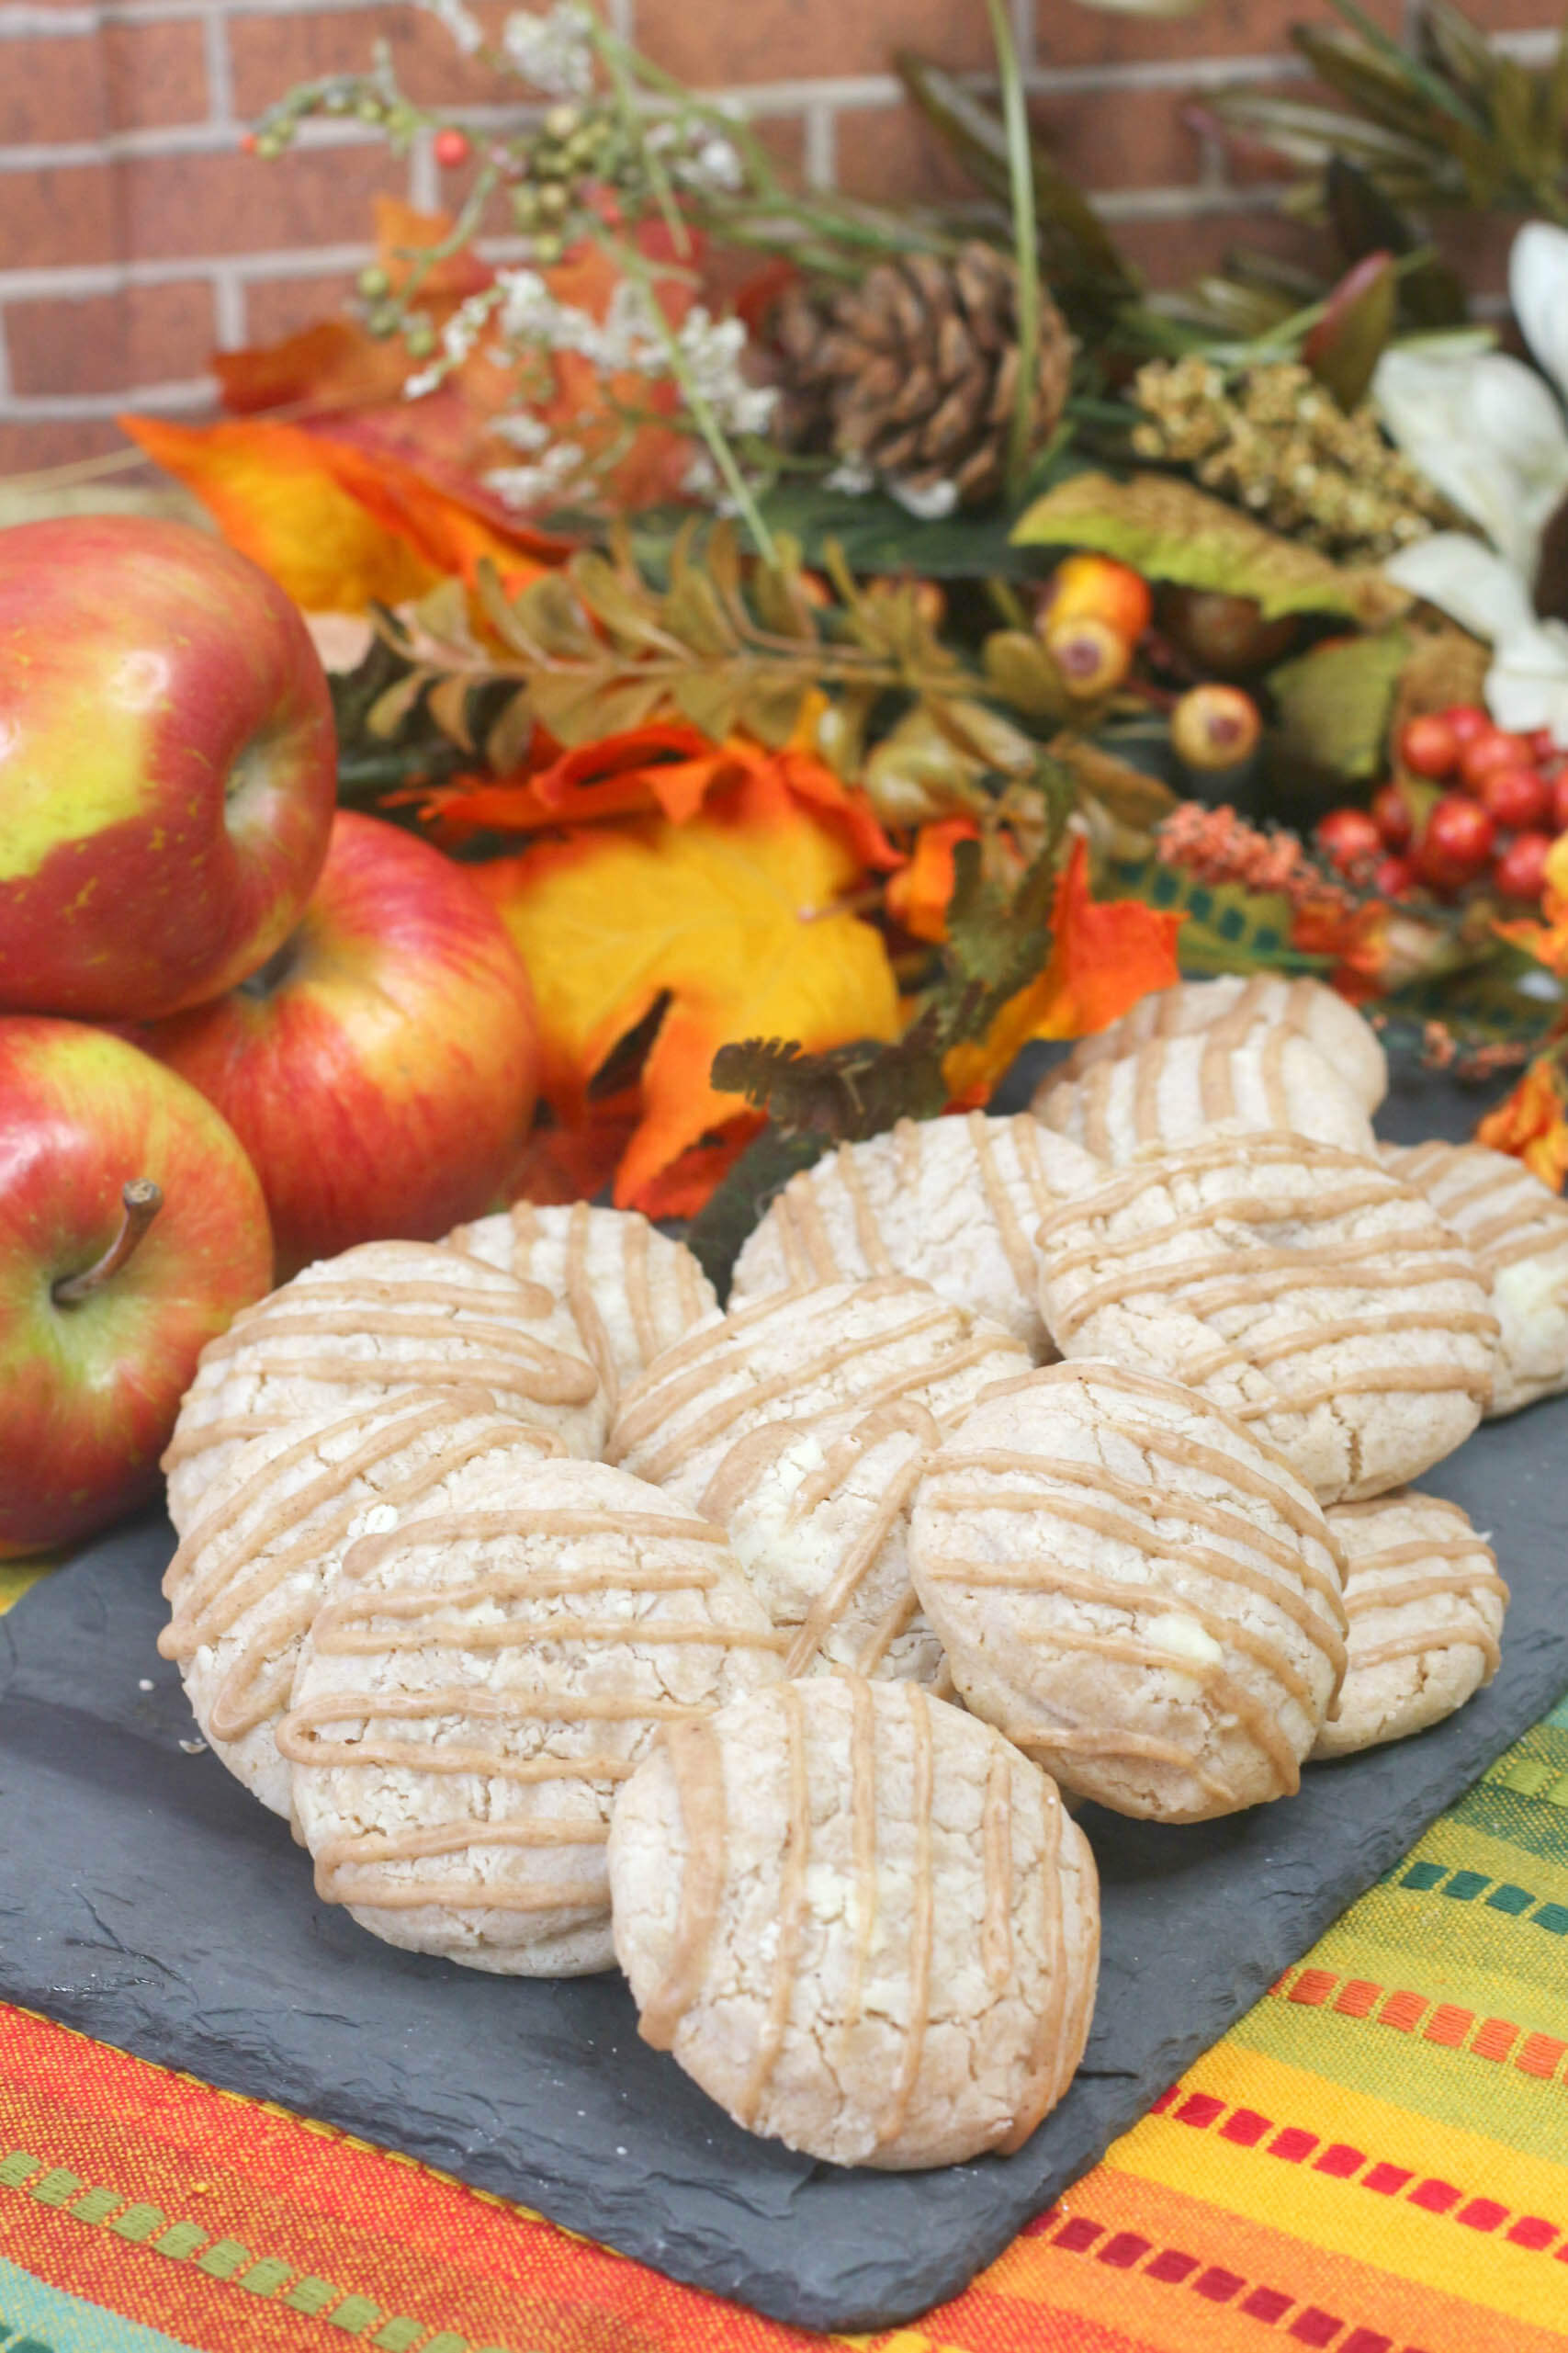 Apple Pie Spiced Cookies with Spiced Glaze